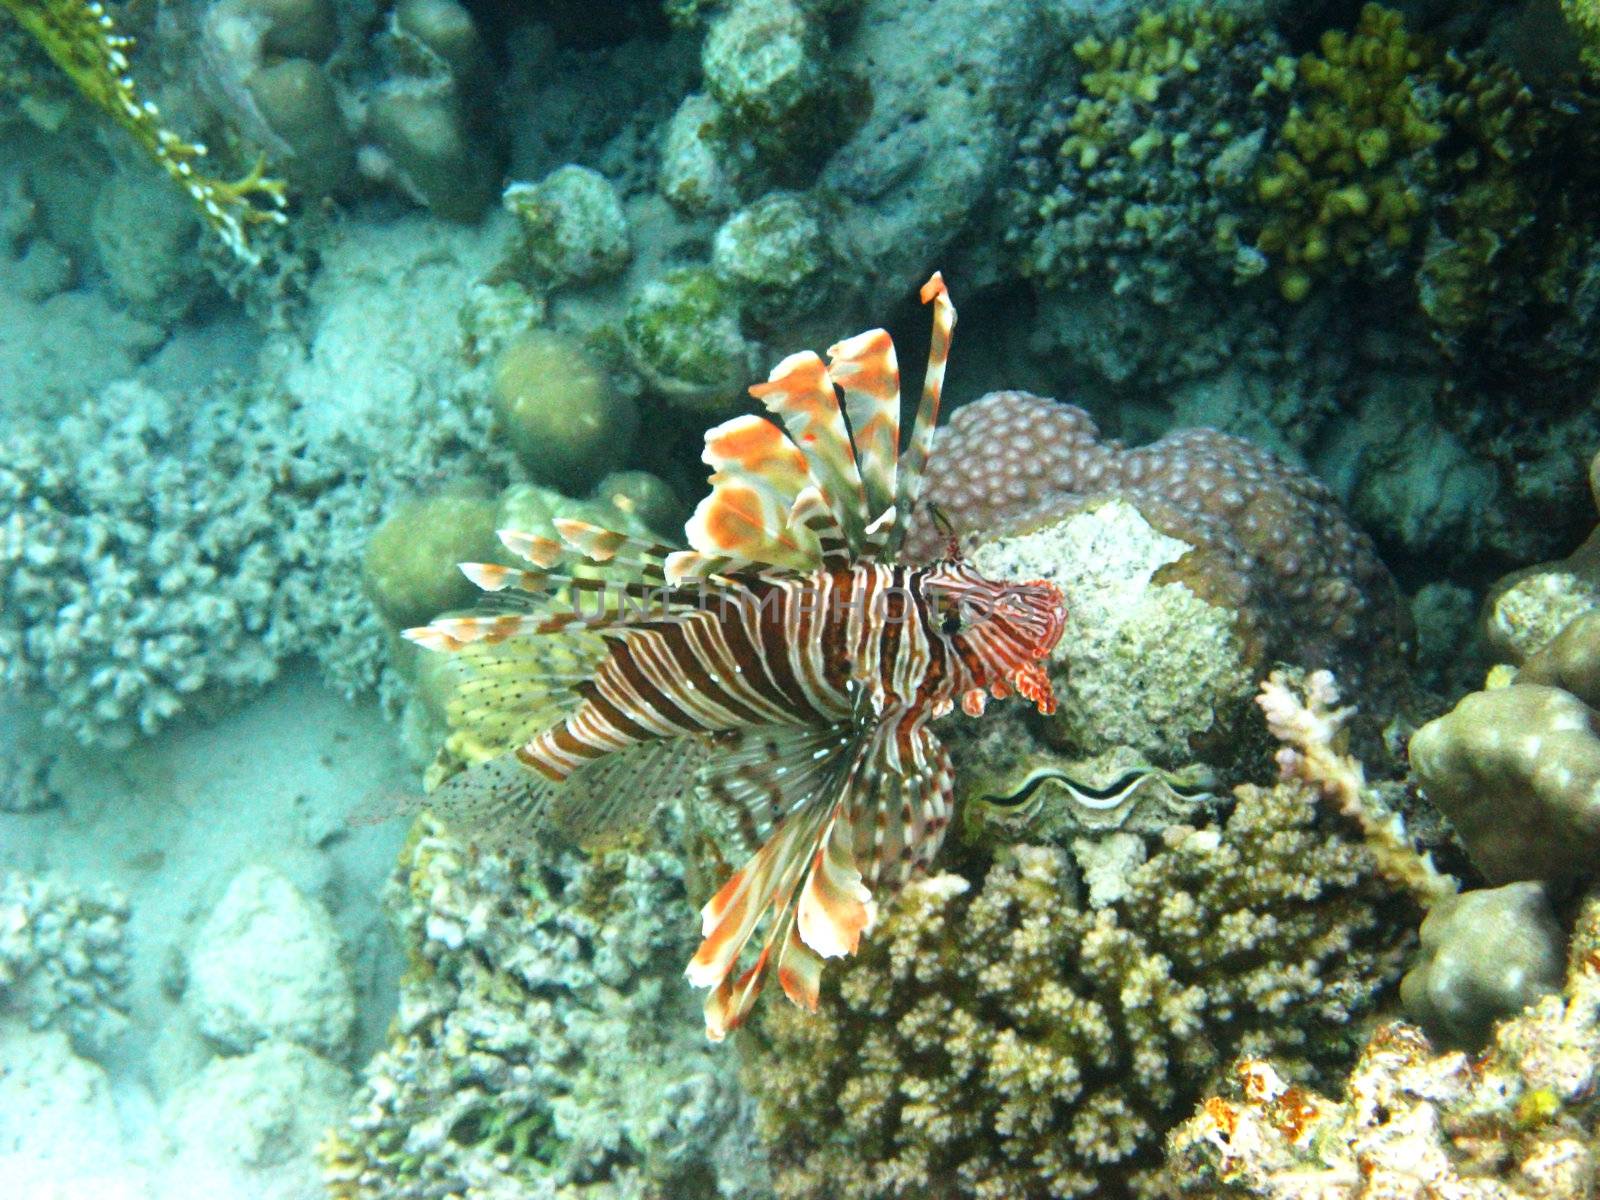 Red lionfish and coral reef in Red sea